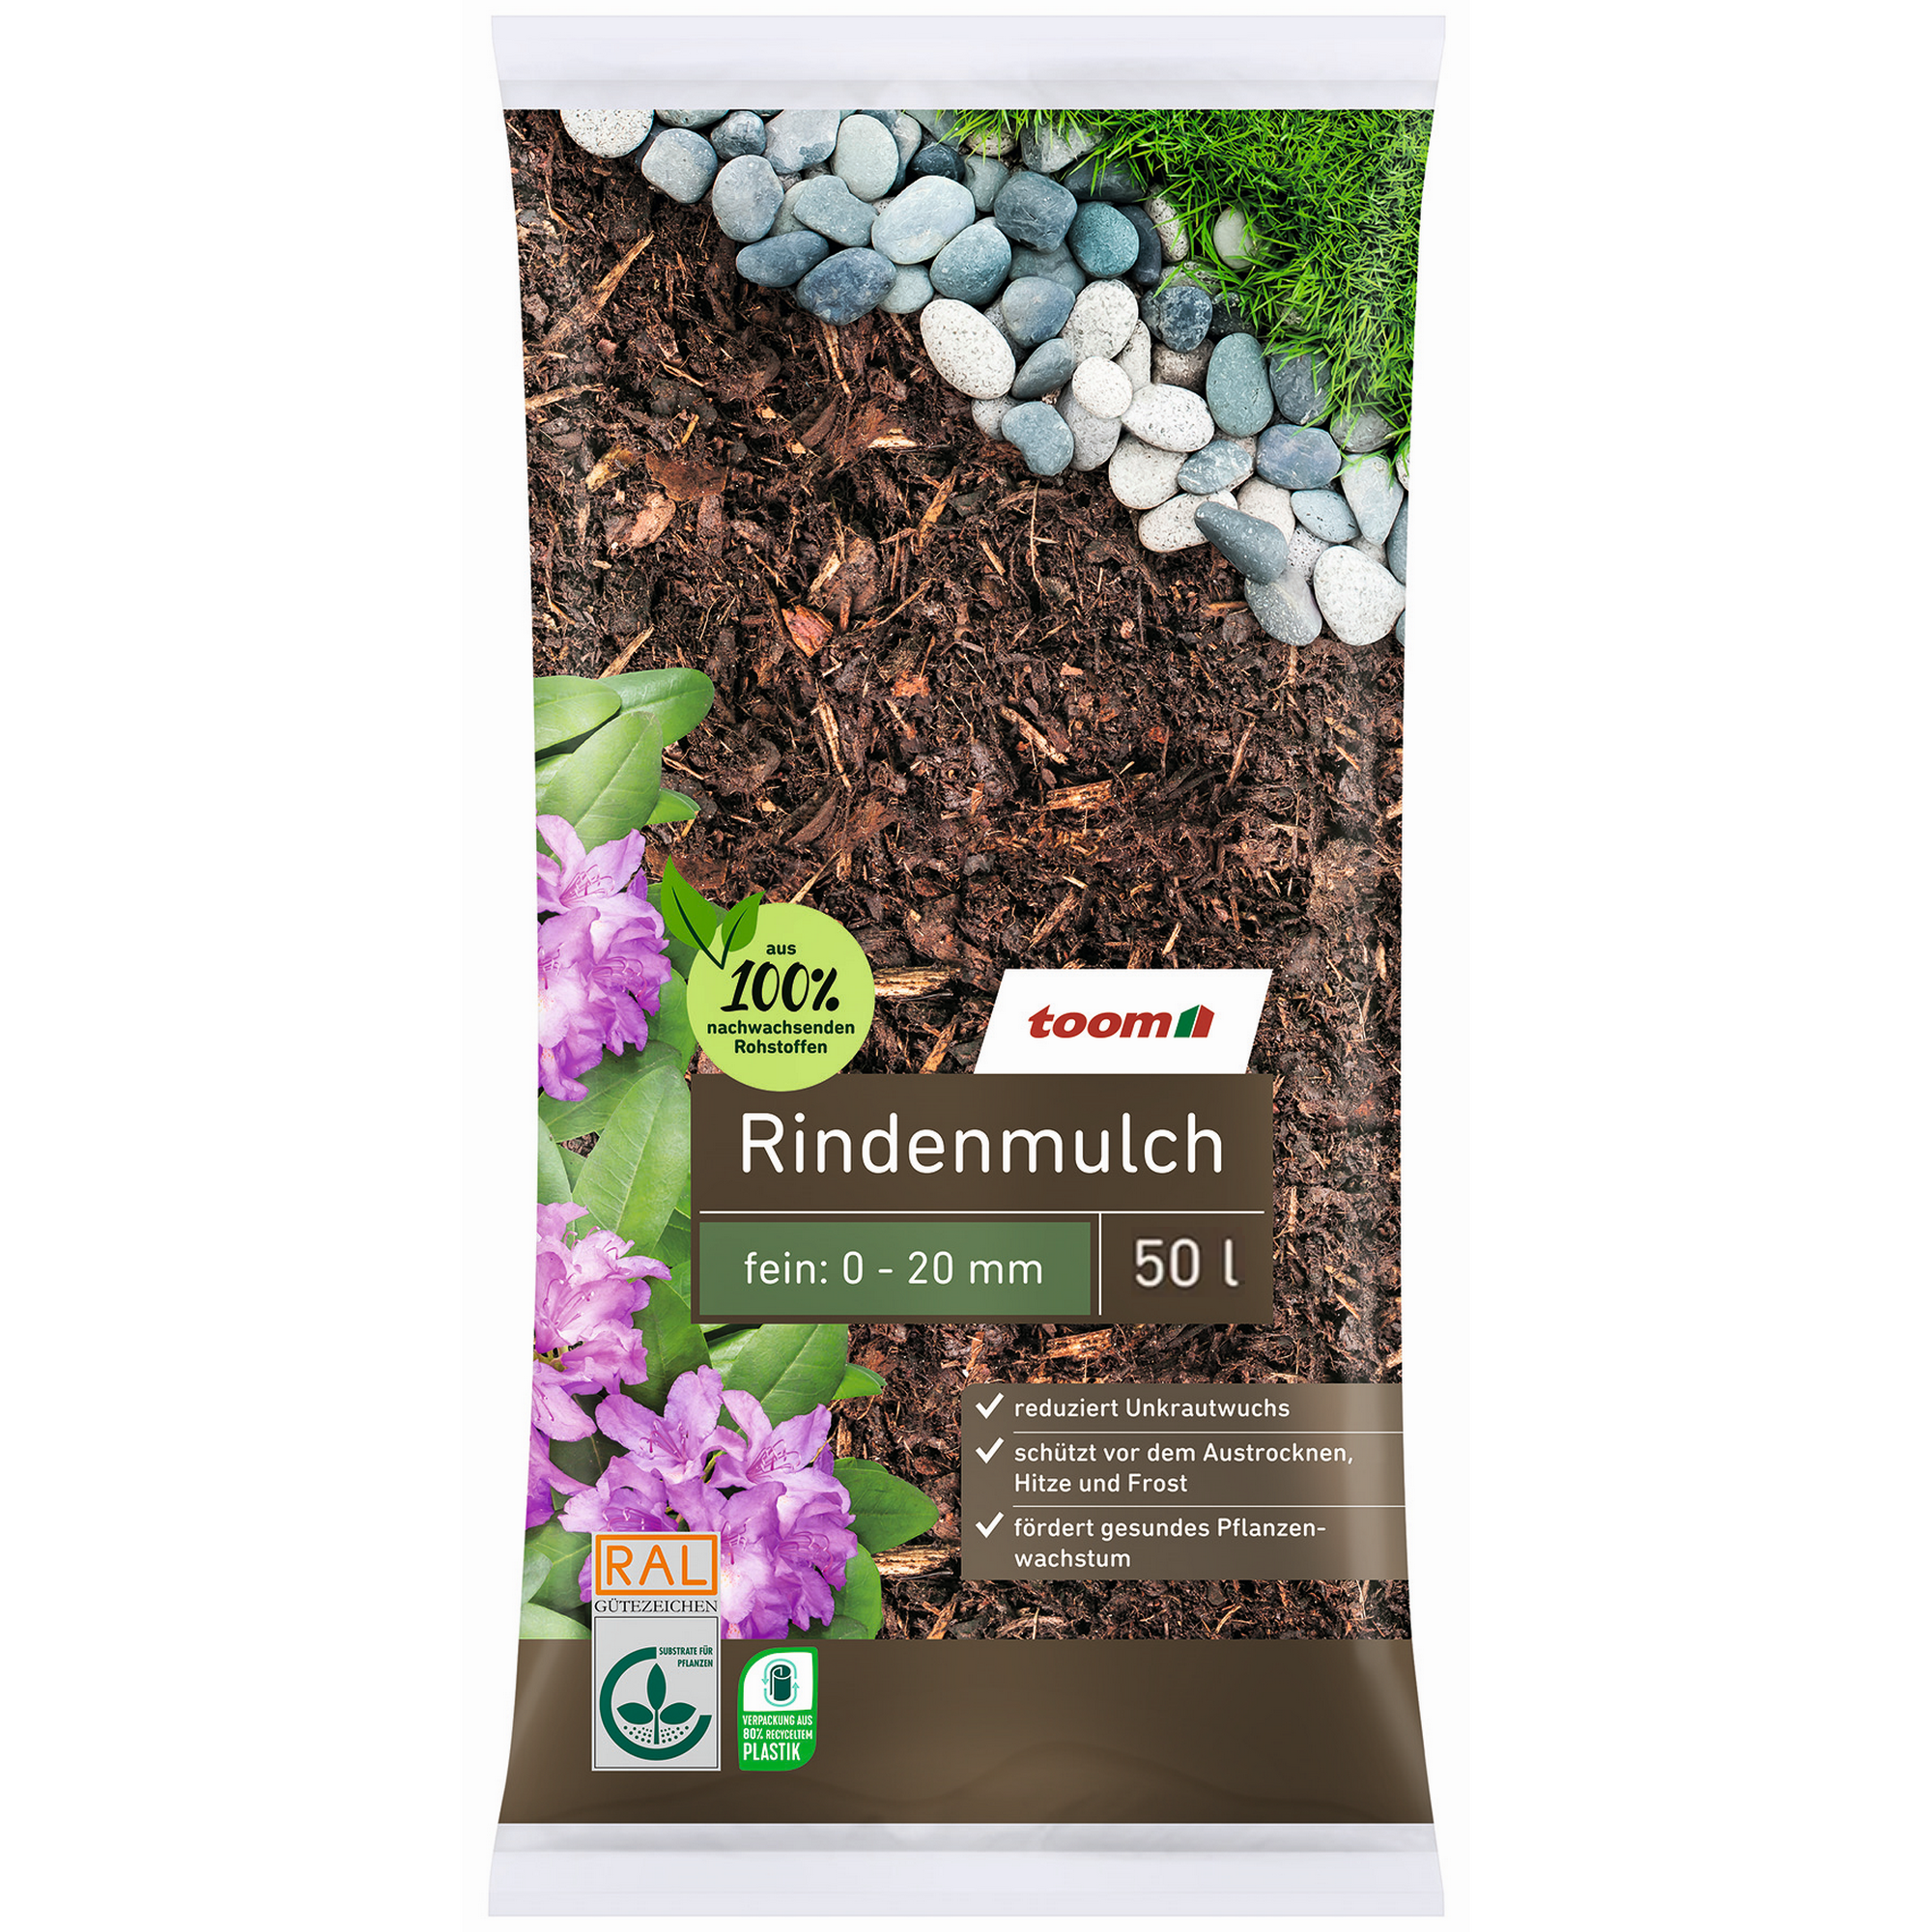 Rindenmulch 0-20 mm 50 l + product picture